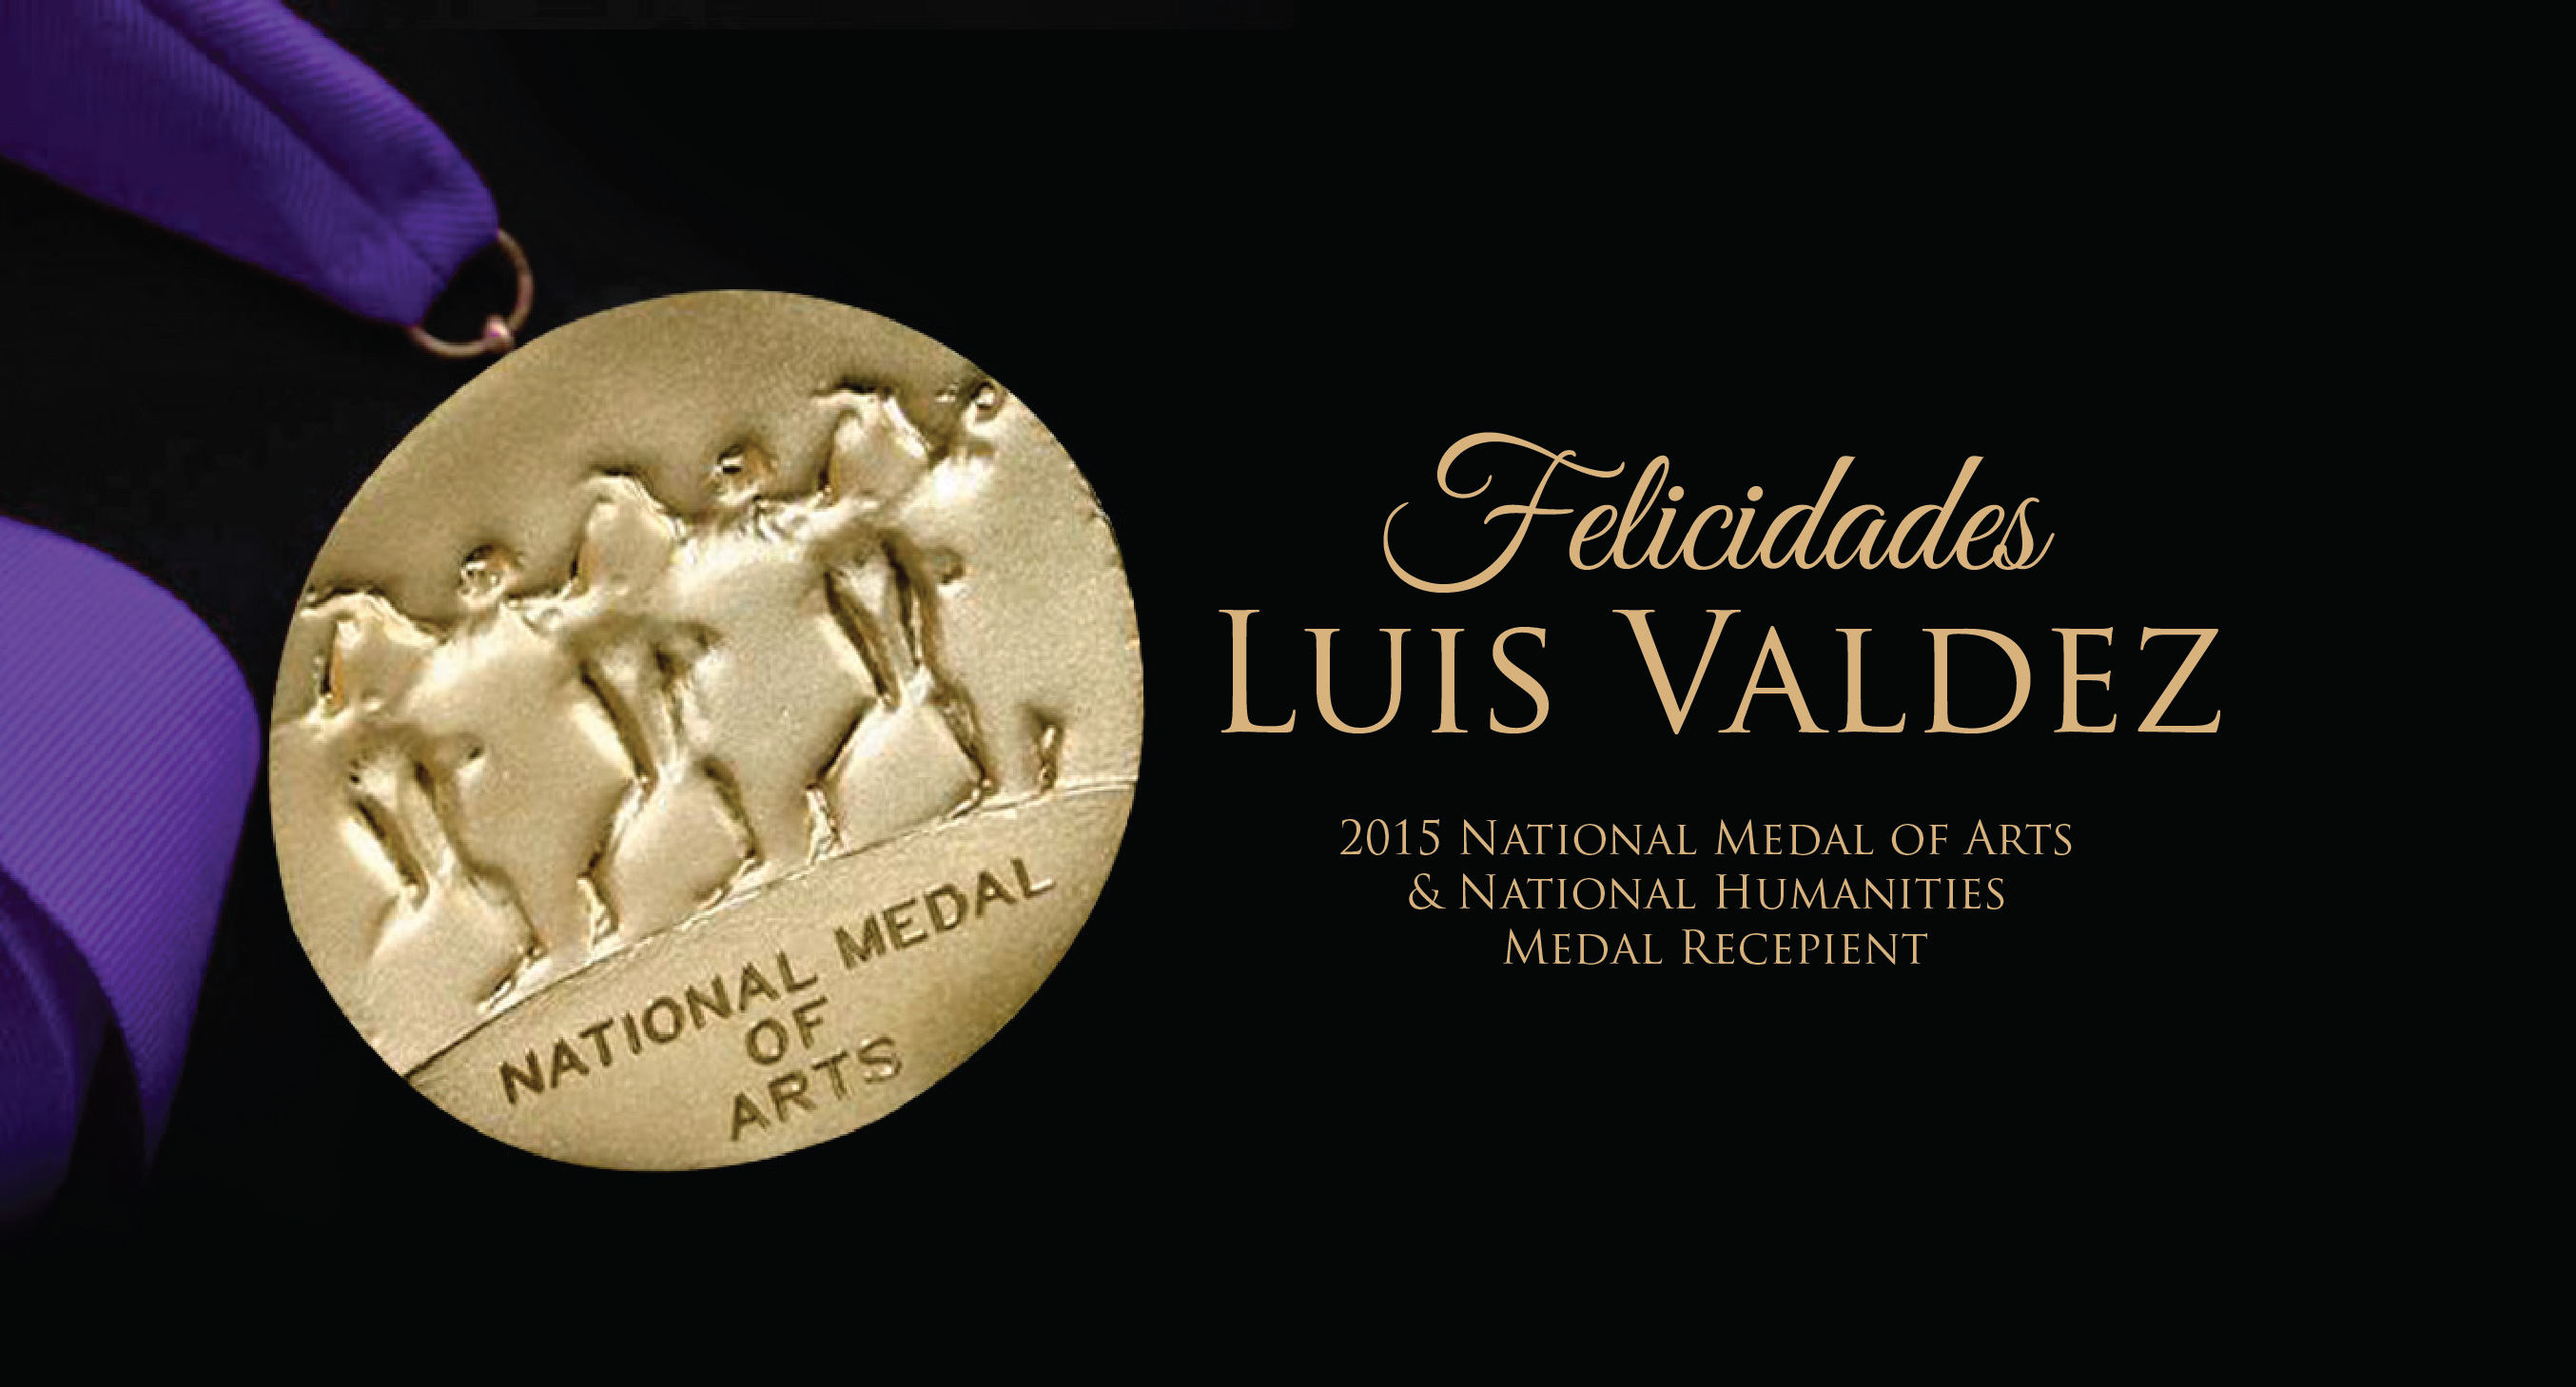 Luis Valdez to be awarded the 2015 National Medal of Arts and National Humanities by President Obama